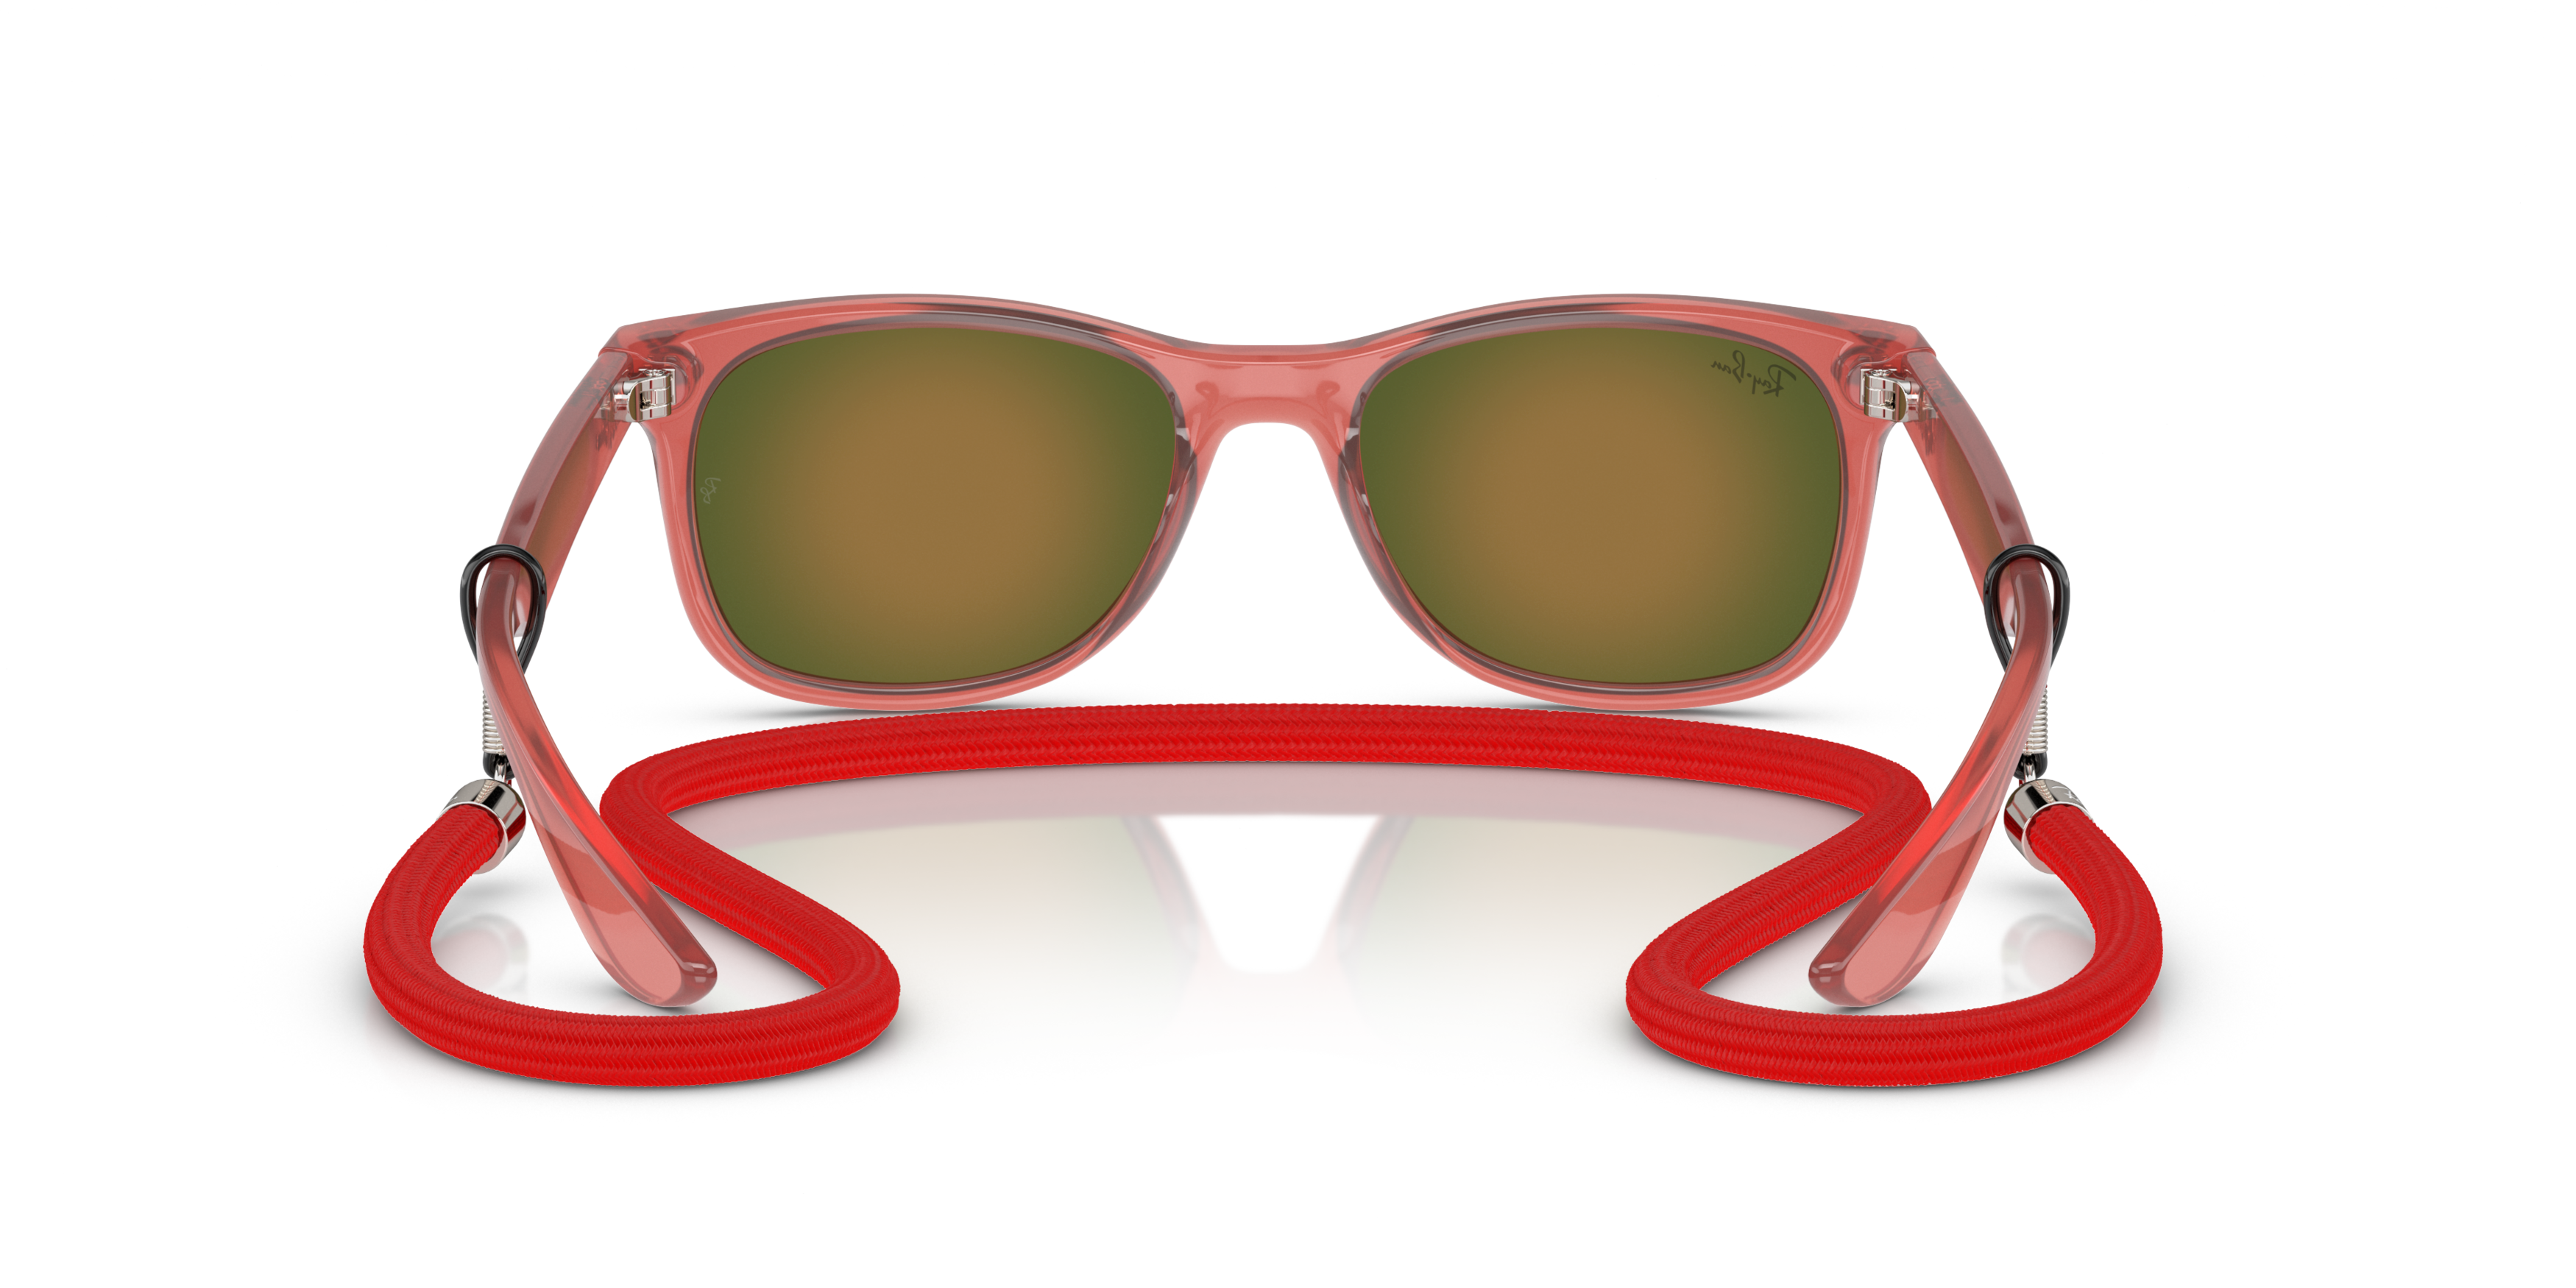 [products.image.detail02] RAY-BAN RJ9052S 7145A8